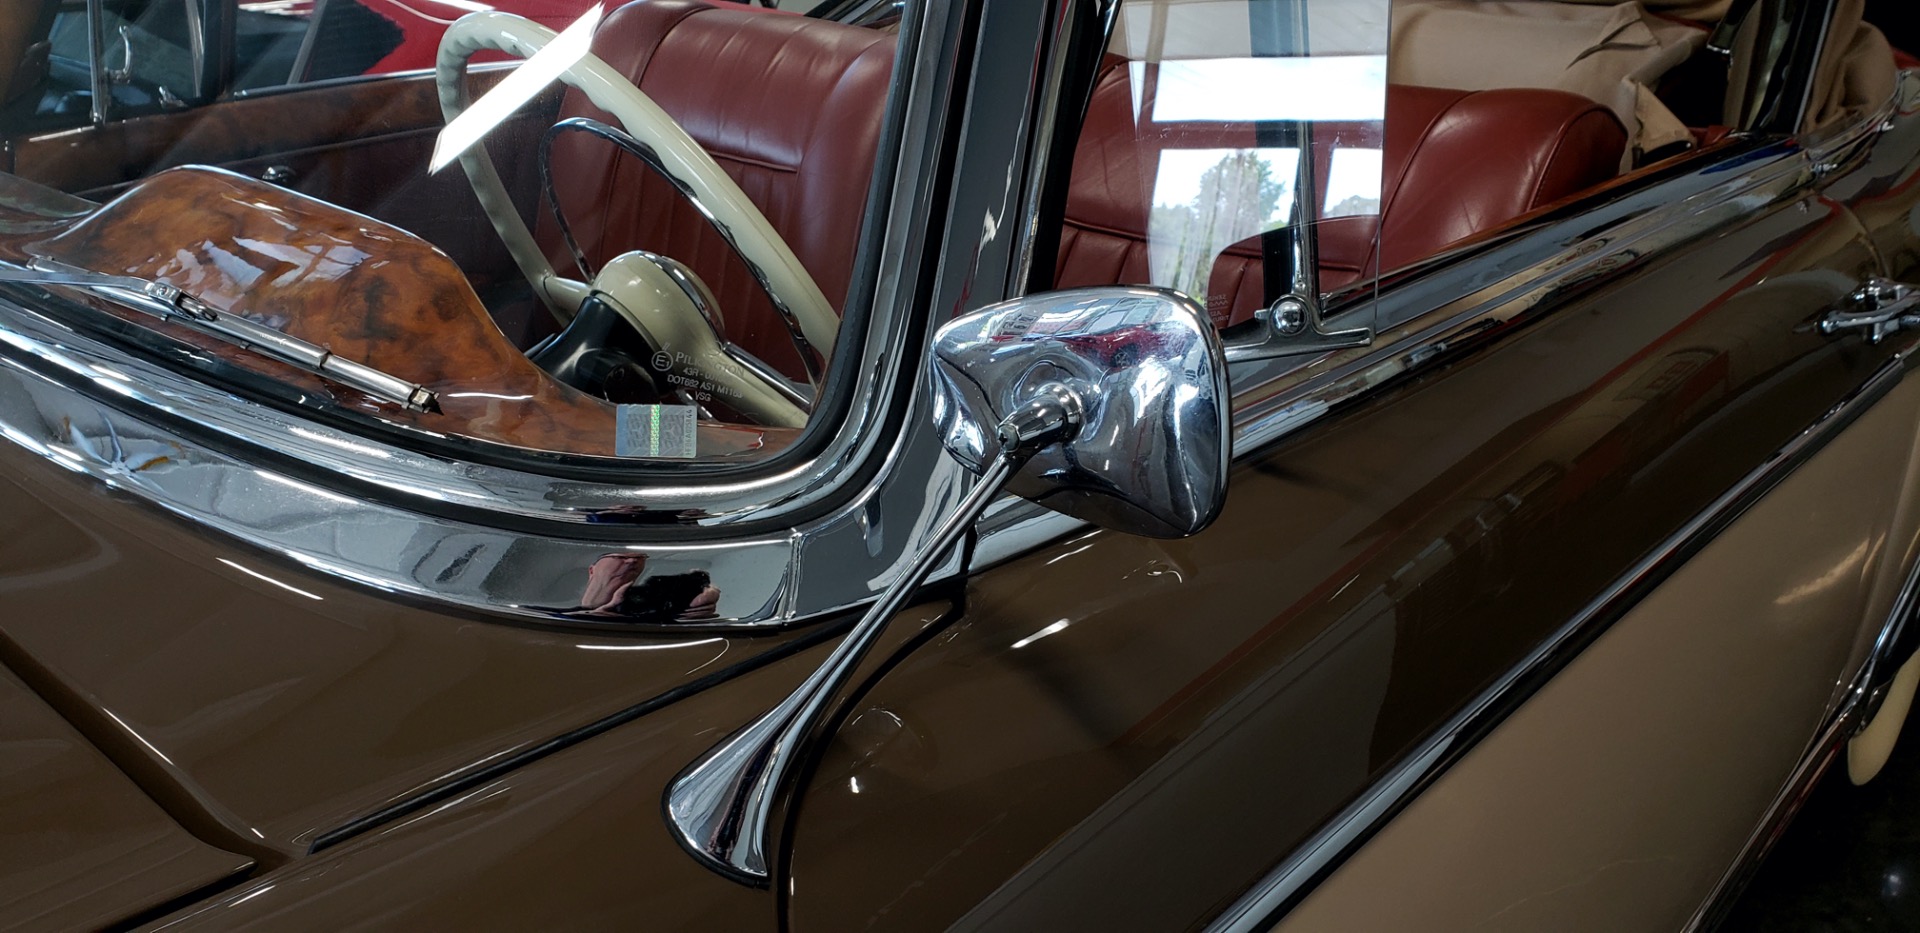 Used 1957 Mercedes-Benz 220 S Cabriolet - Full Restoration for sale Sold at Formula Imports in Charlotte NC 28227 60